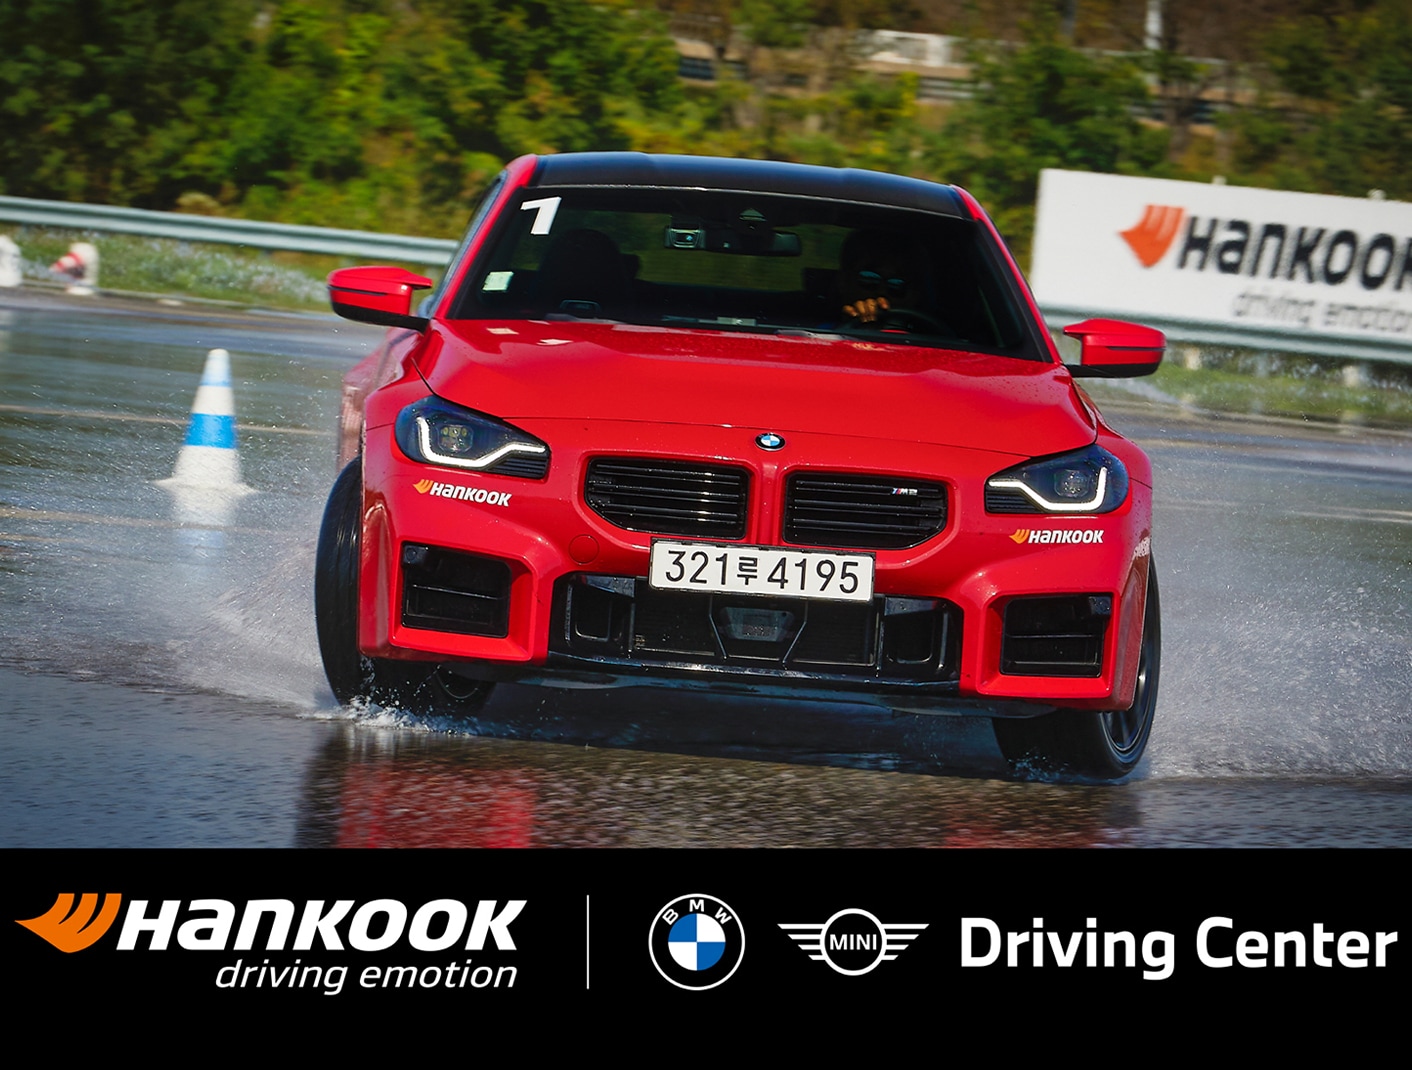 Hankook Tire celebrates 10 years as an exclusive supplier of high-performance tires to the BMW Driving Center